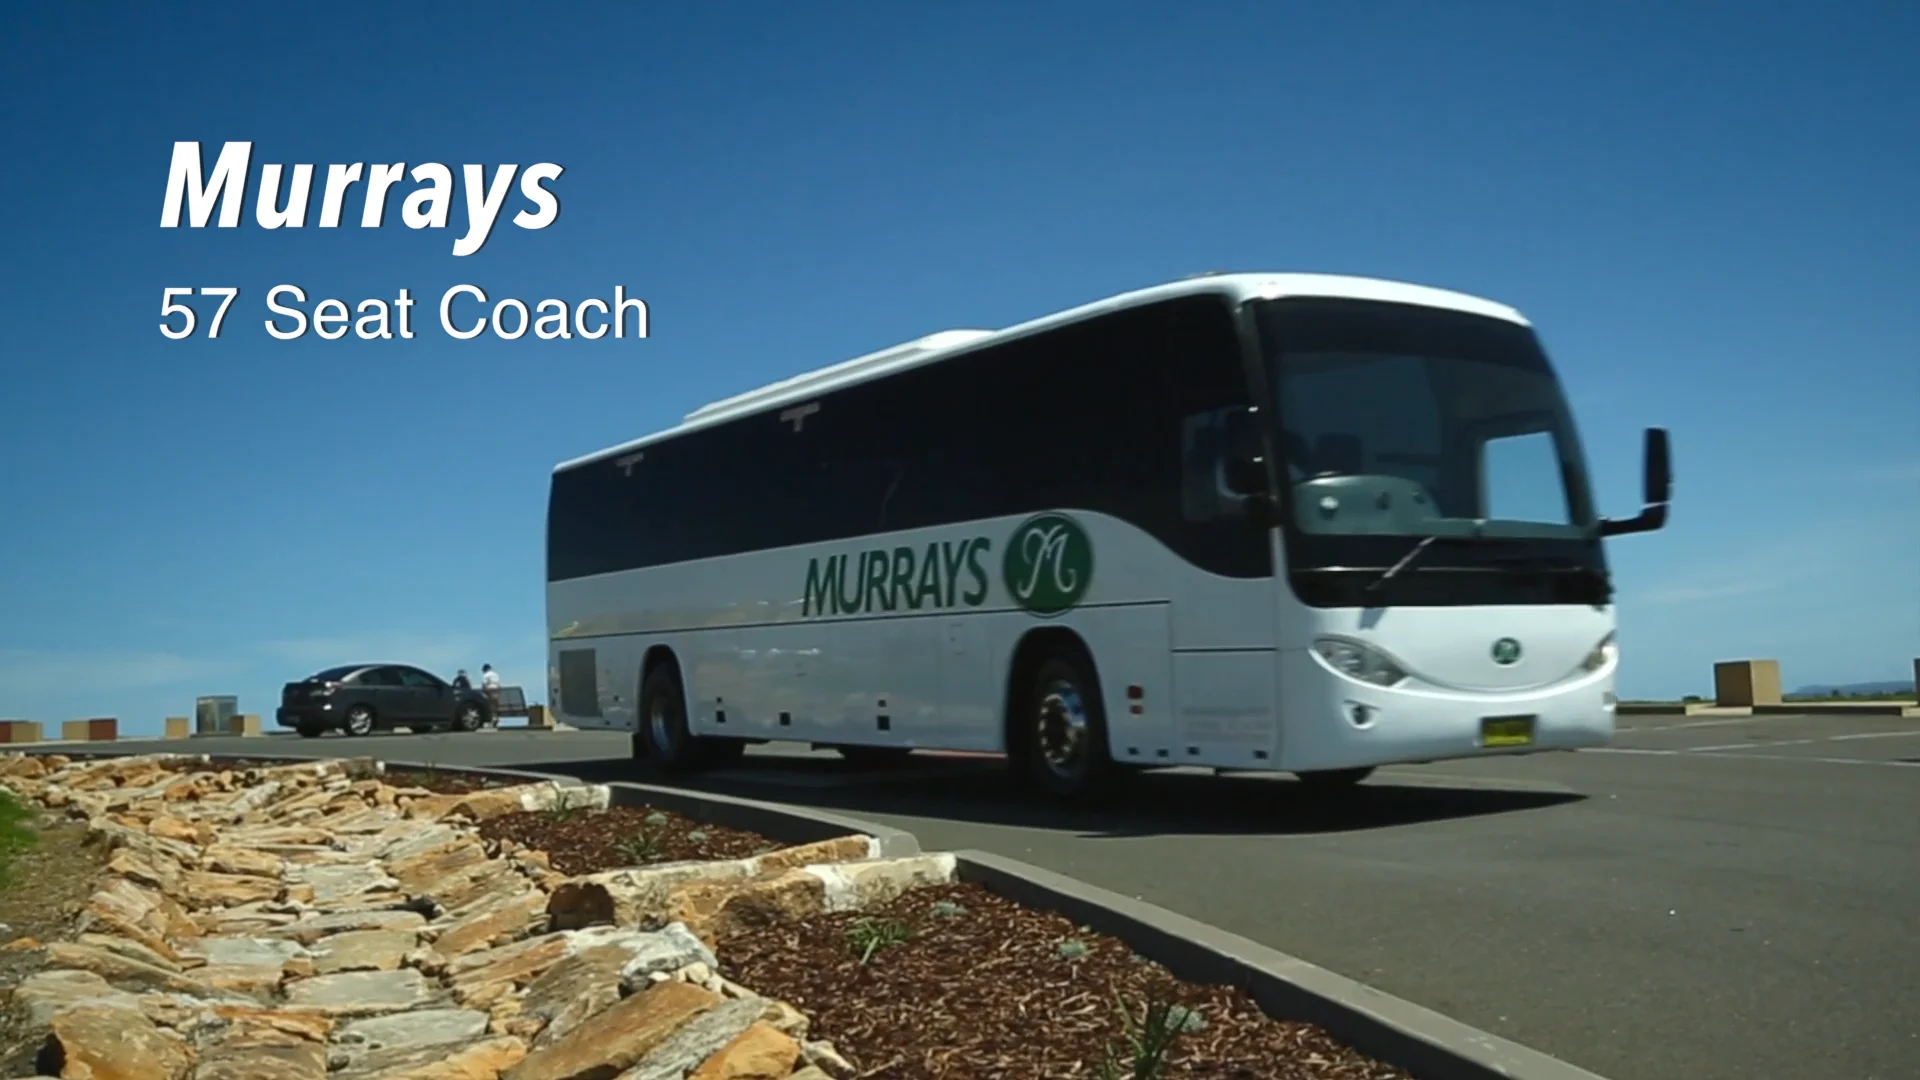 Murrays Coaches - Sydney Bus and Coach Hire - Mascot